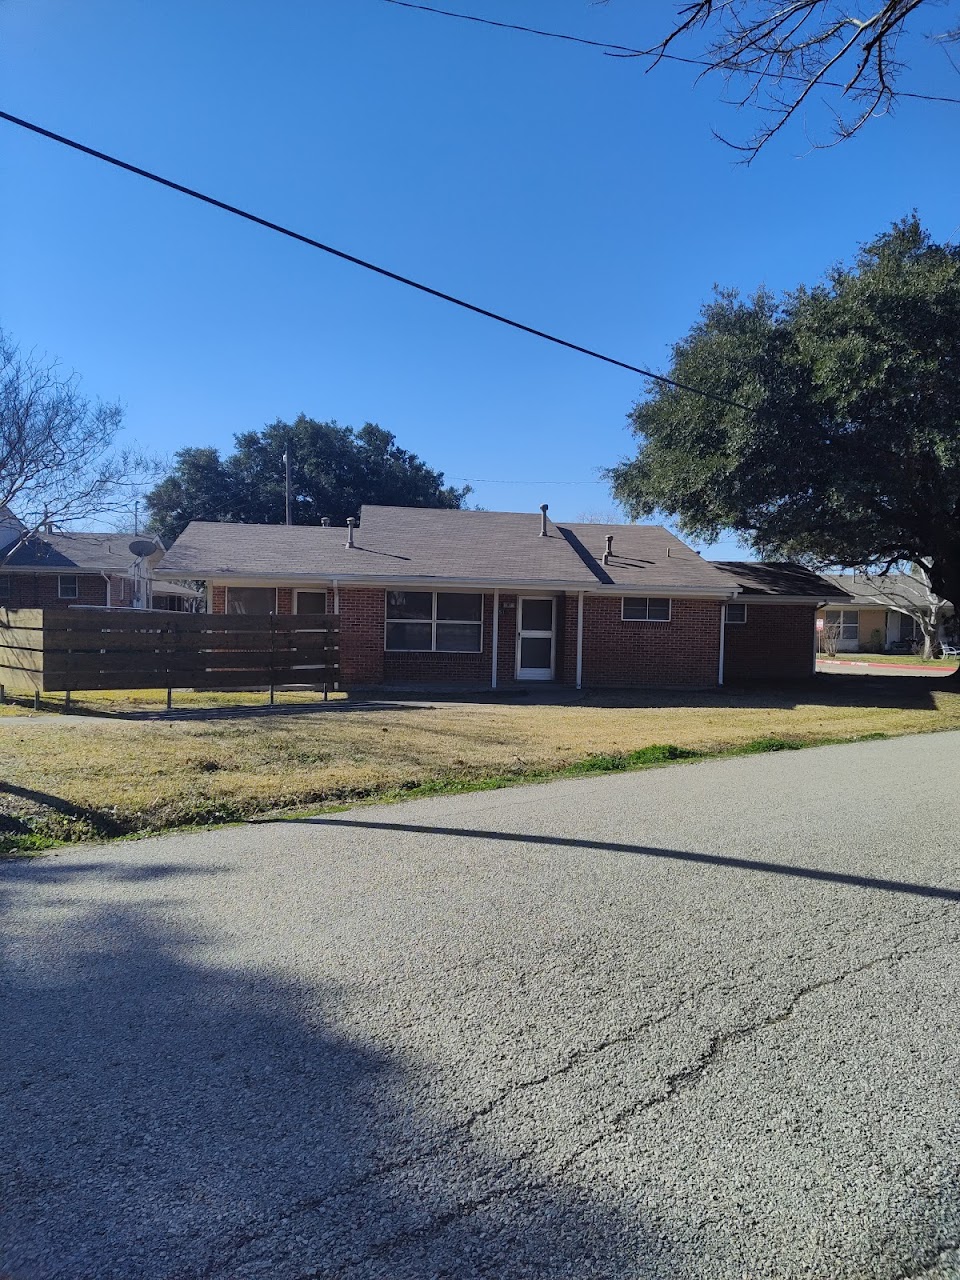 Photo of Housing Authority of Royse City. Affordable housing located at 305 N HOUSTON Street ROYSE CITY, TX 75189